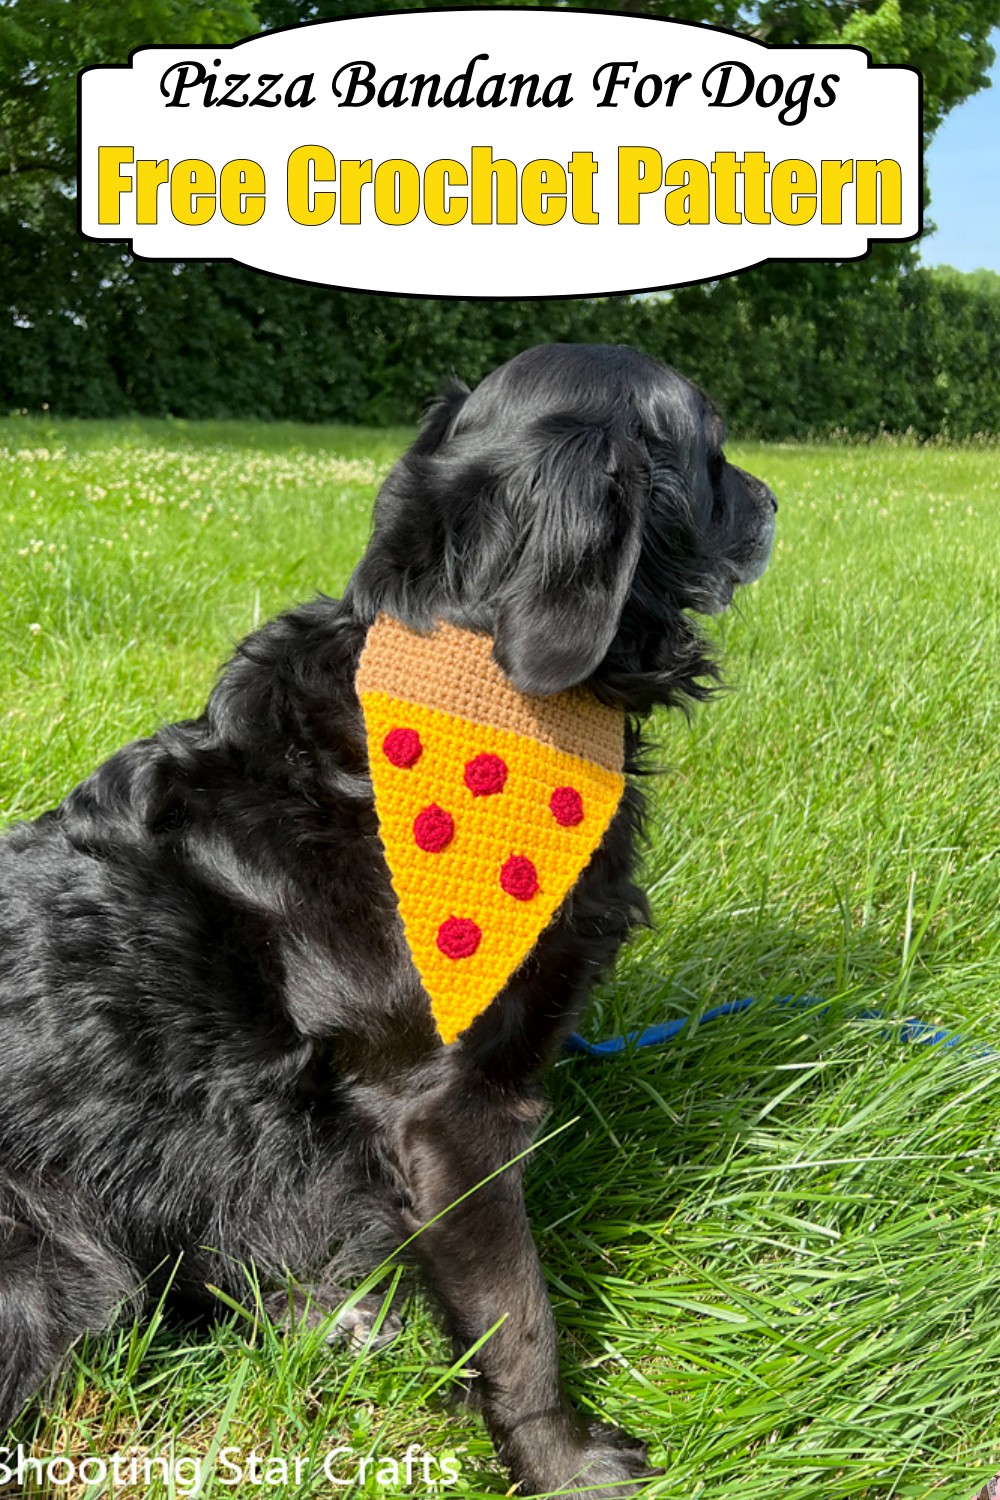 Pizza Bandana For Dogs